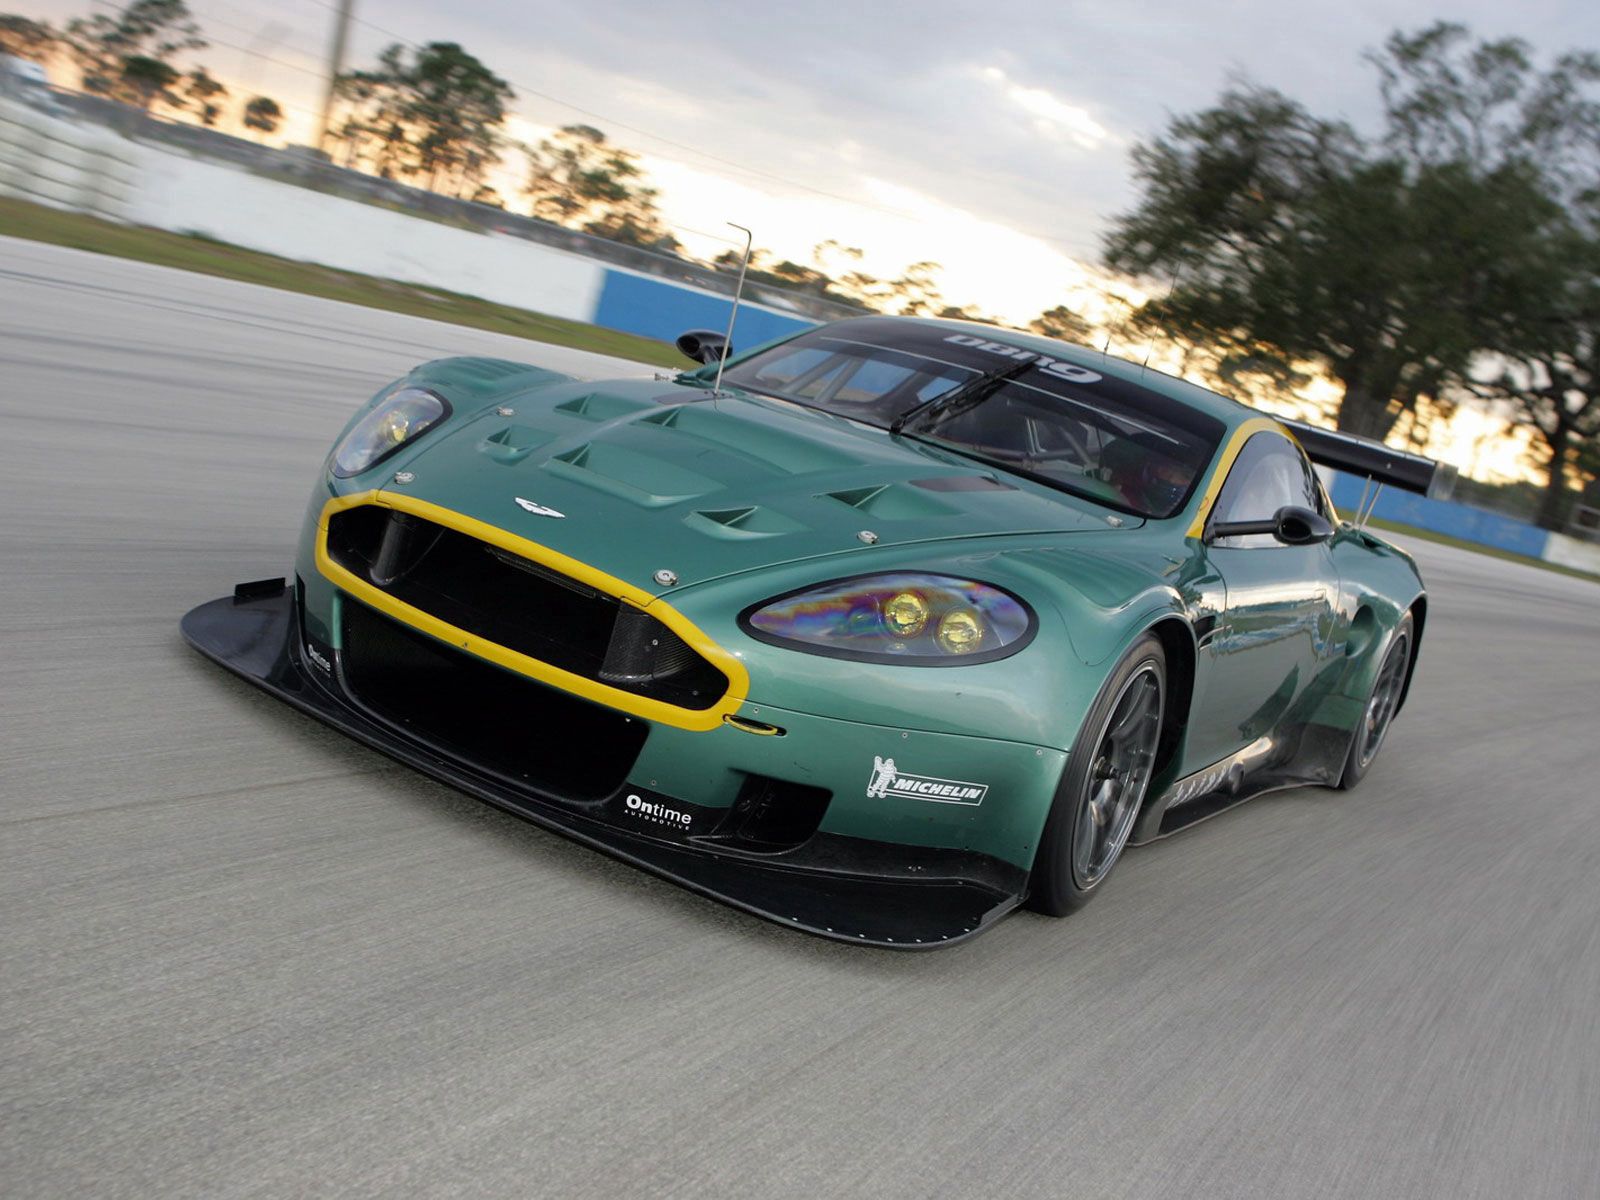 cars, sports, auto, trees, aston martin, green, front view, speed, style, 2005, dbr9